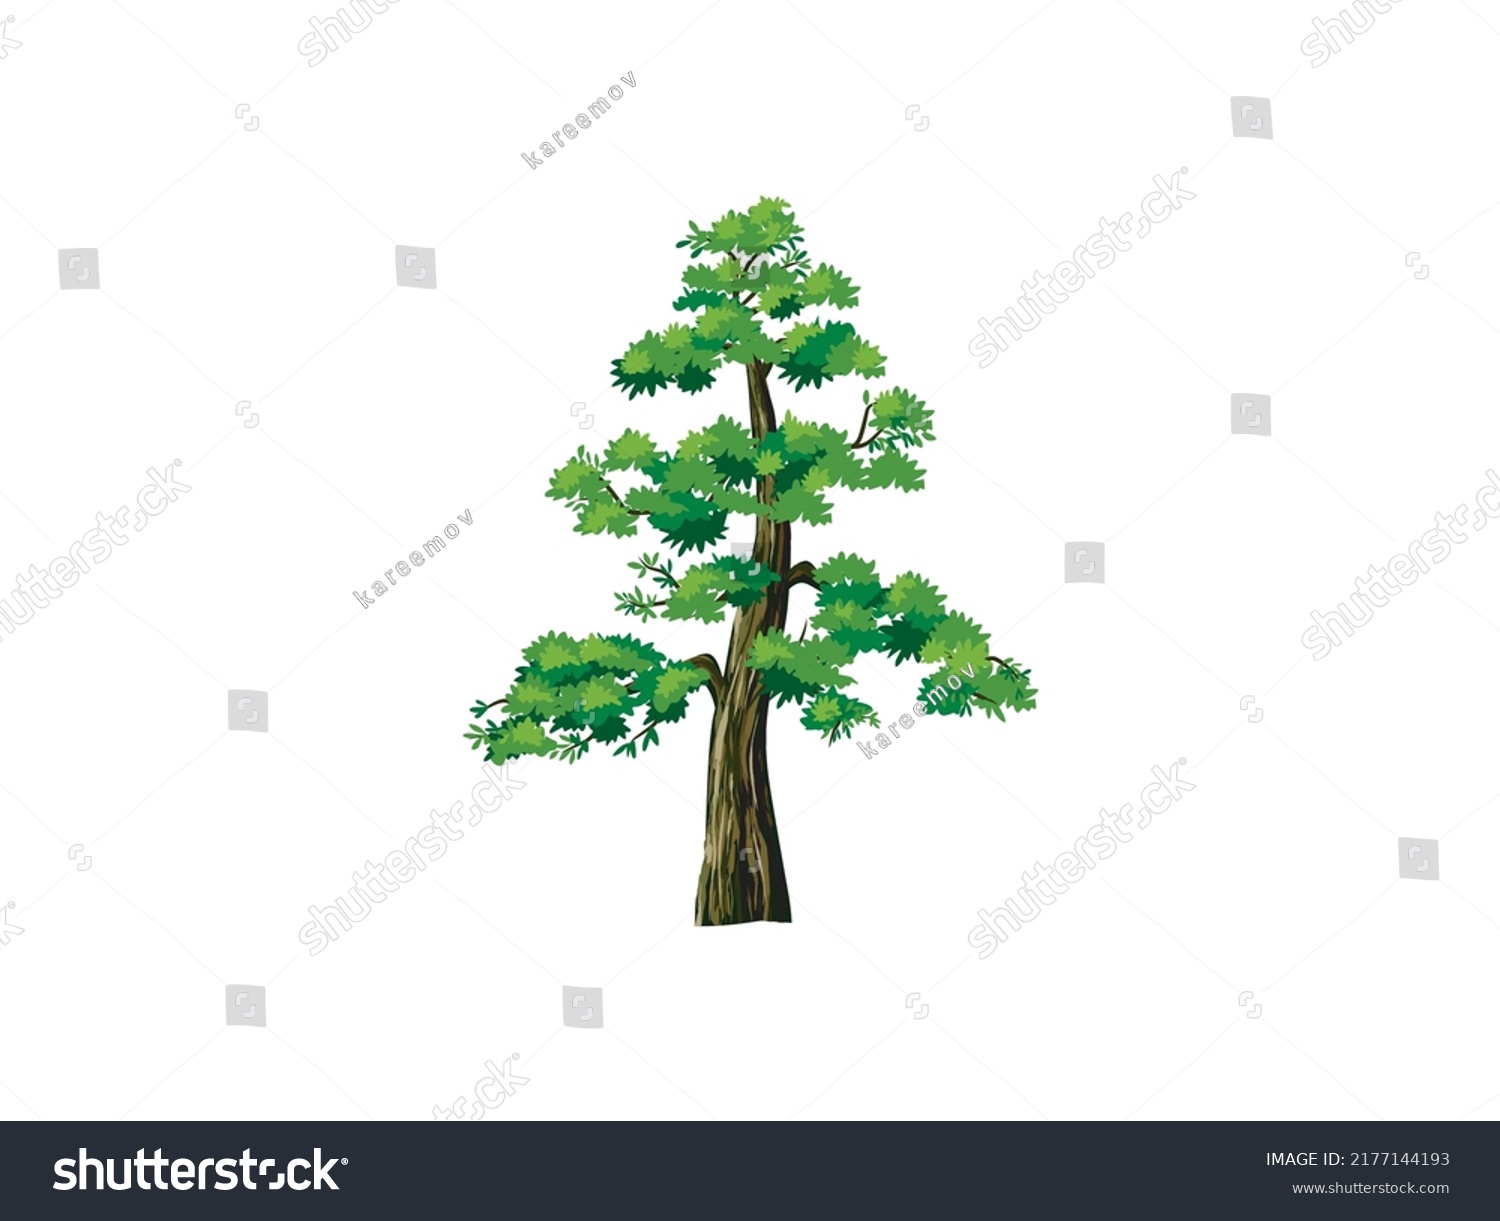 SVG of redwood tree vector illustration, the tallest tree in the world. Sequoiadendron giganteum plant logo. sequoia tree. svg